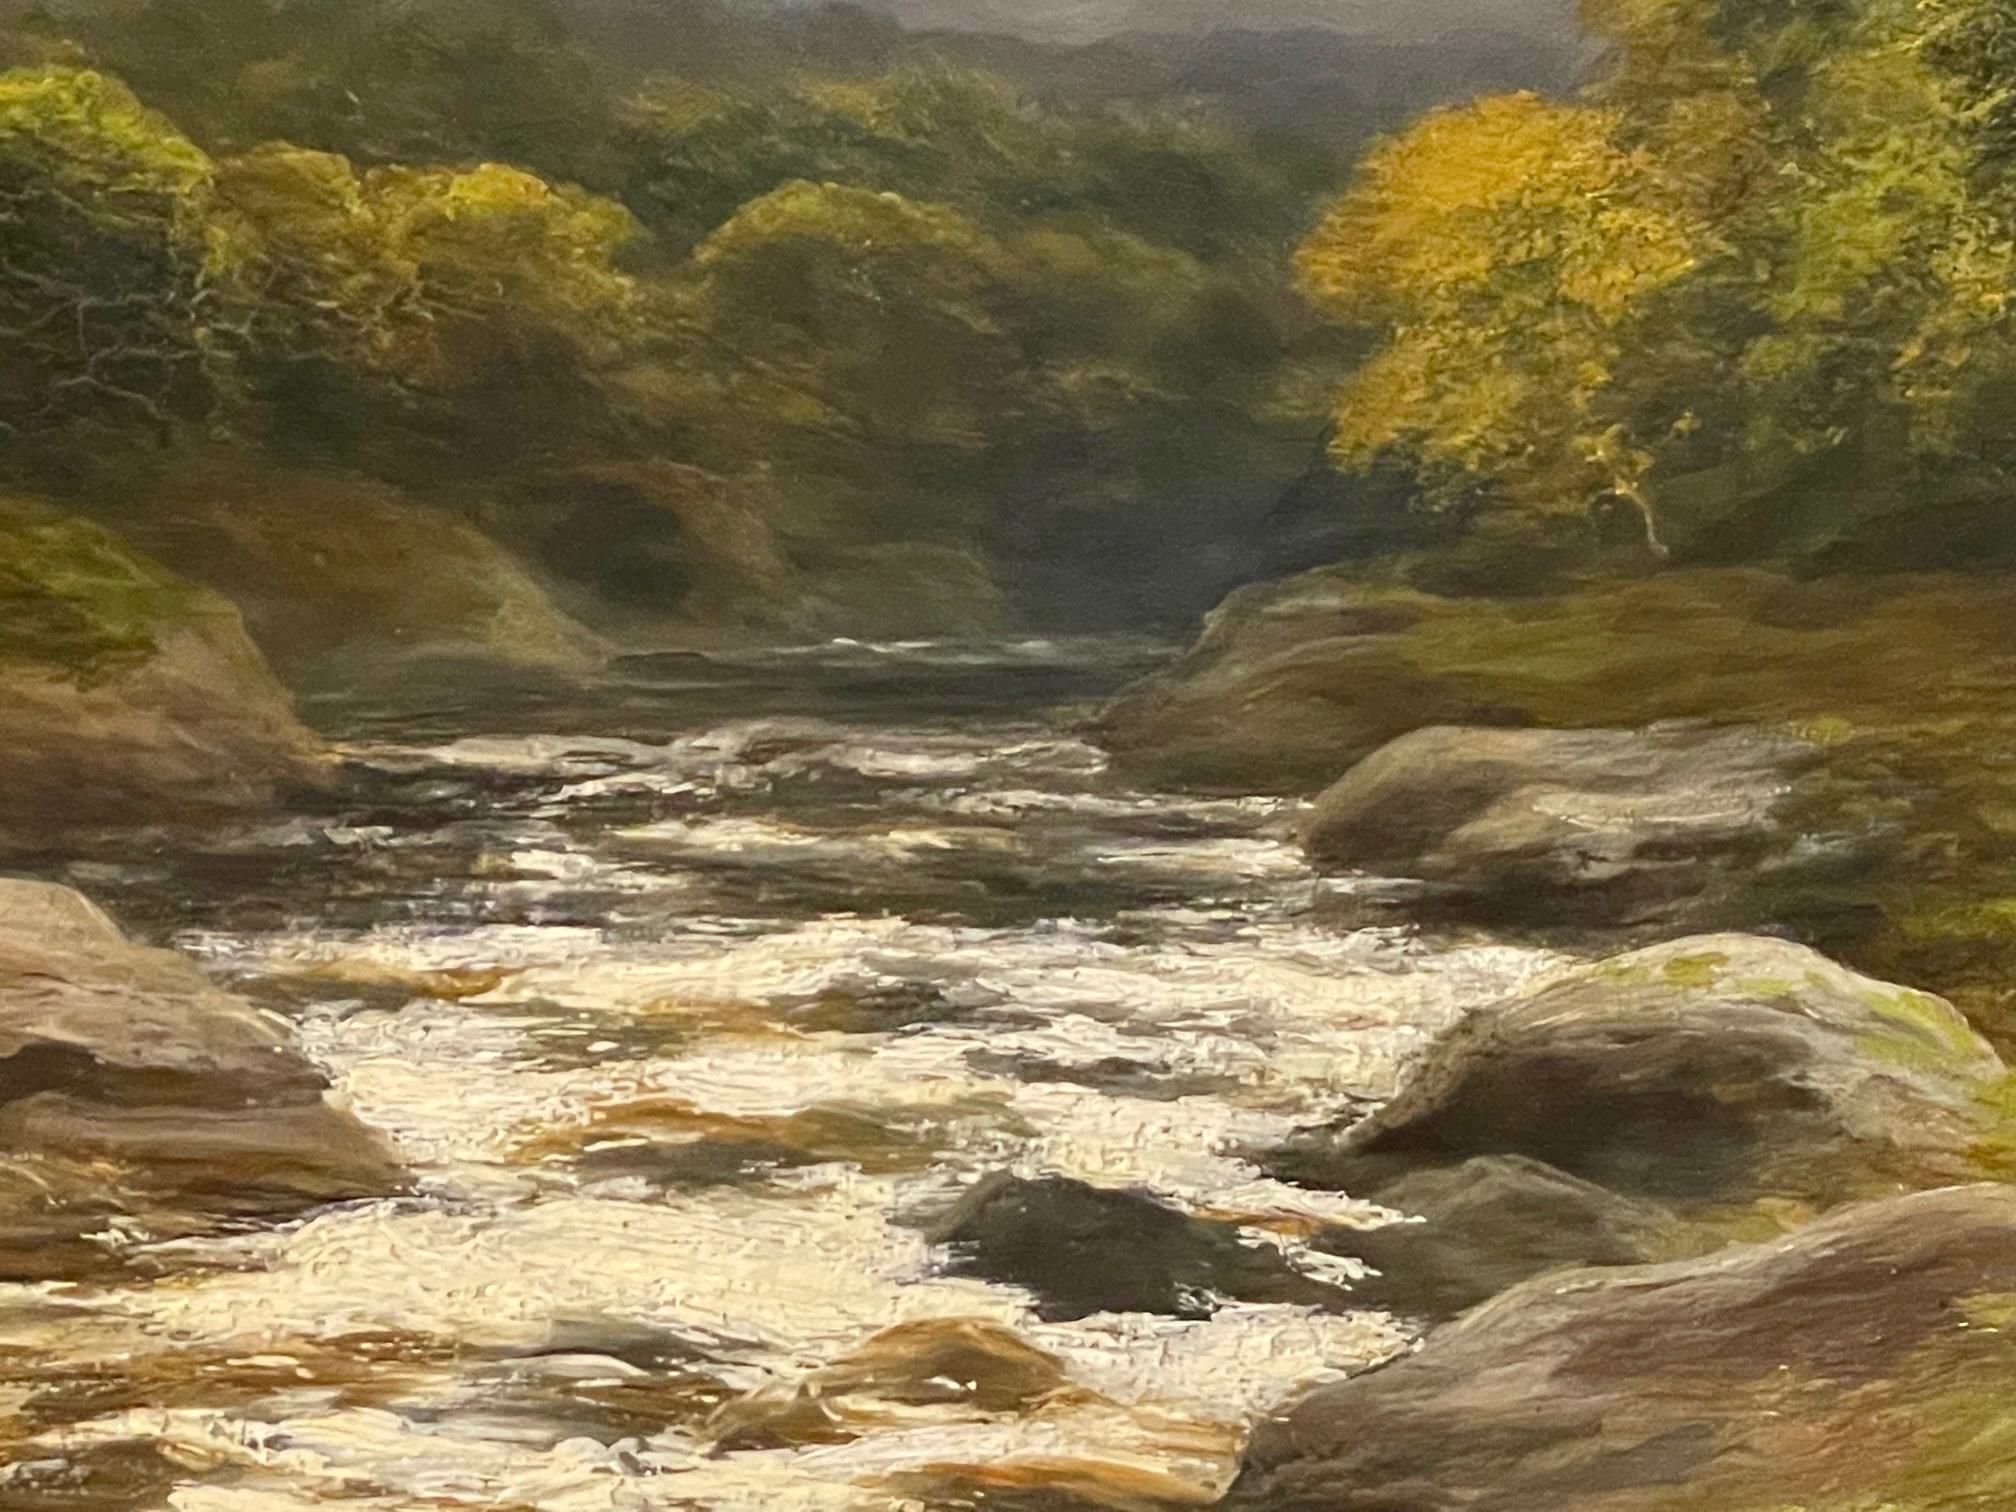 Highland Stream with Sheep - Realist Painting by William Beattie-Brown